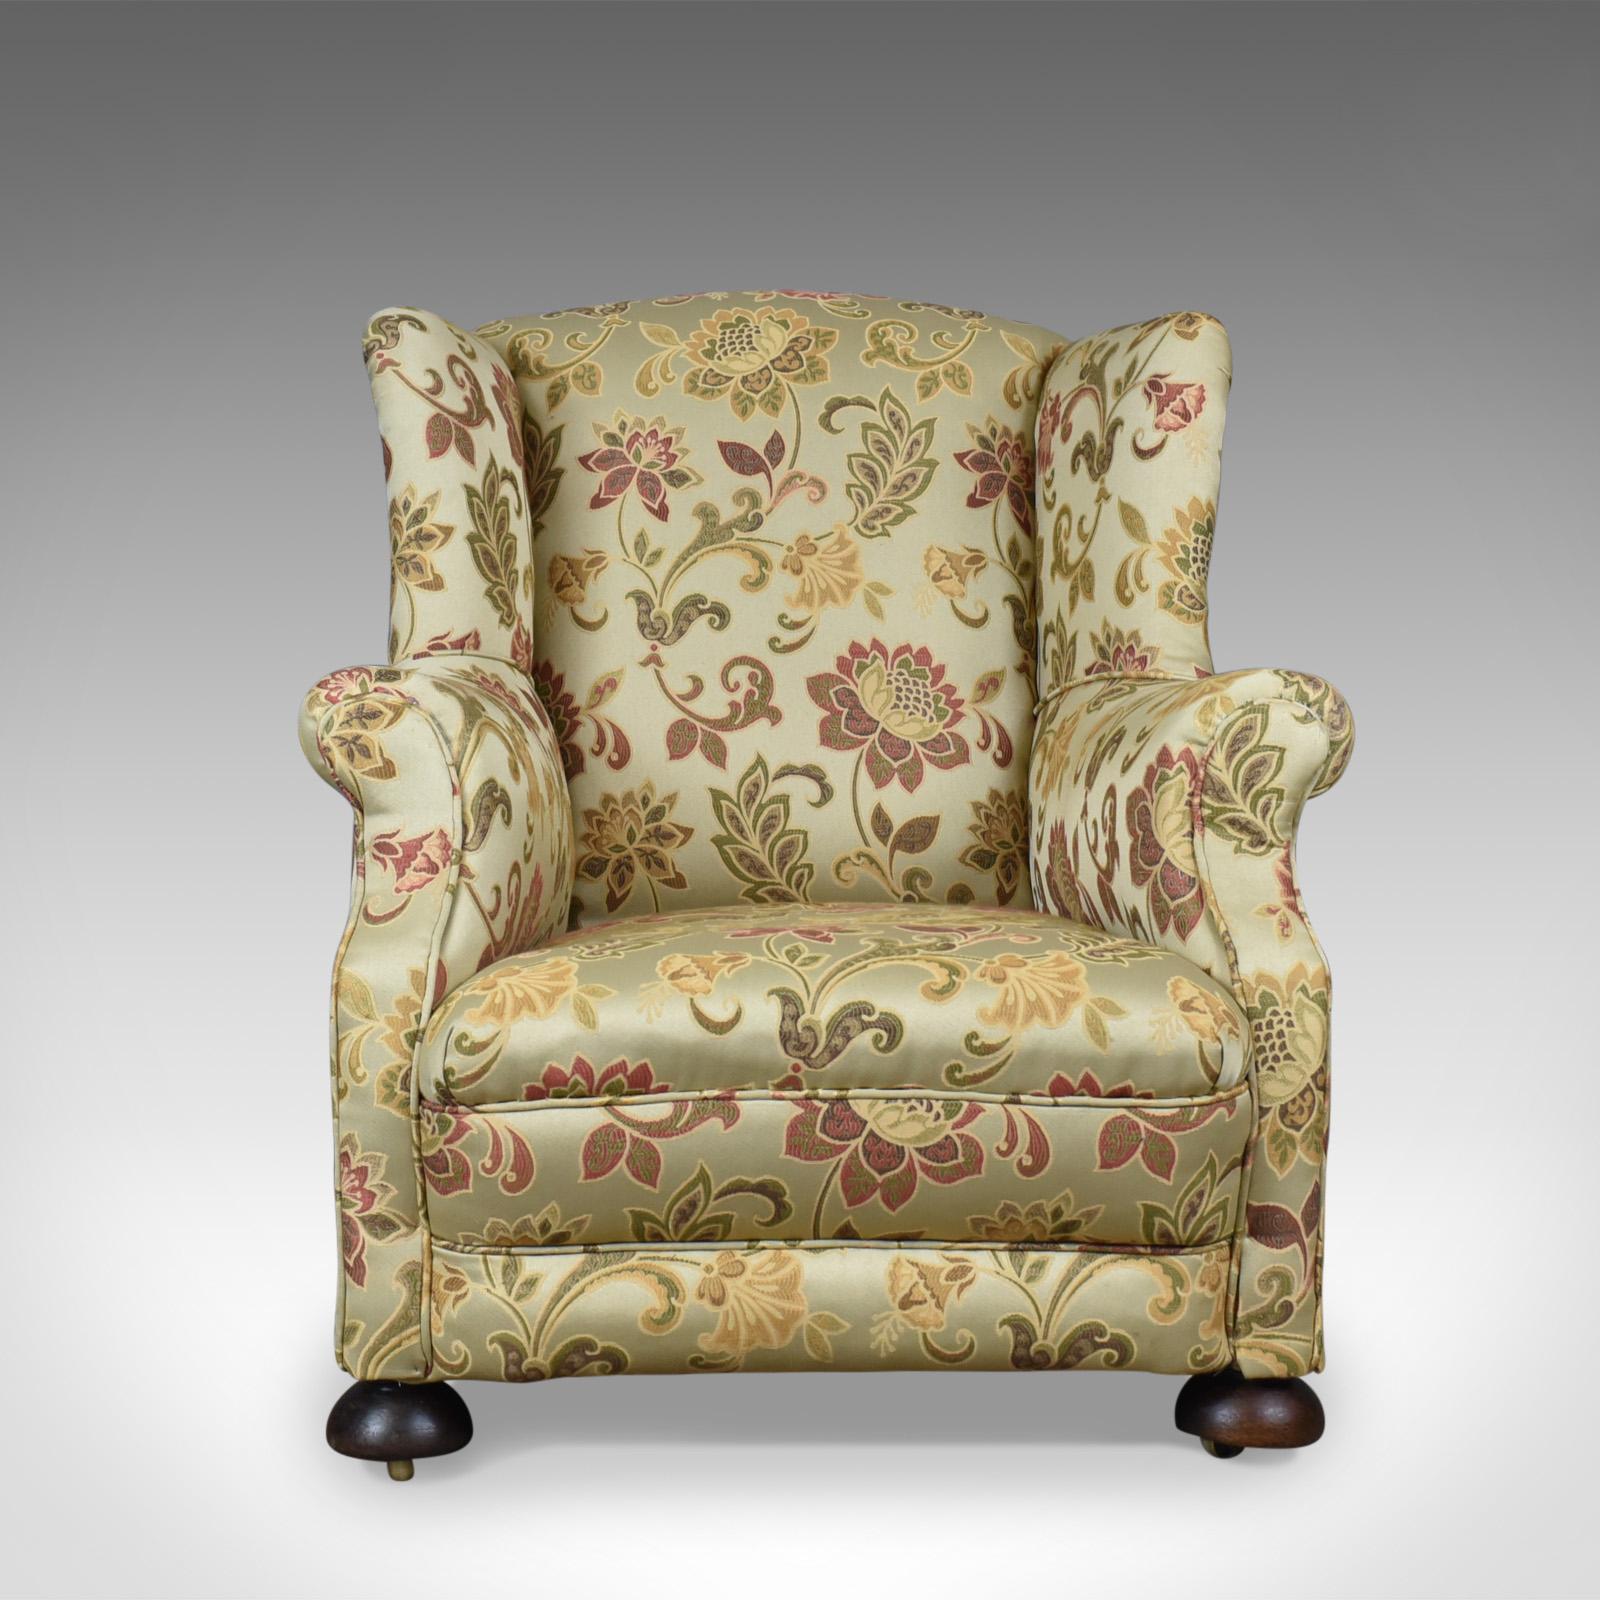 This is an antique wingback armchair. An English, Victorian, deep club chair dating to the end of the 19th century, circa 1900.

Classic proportions offering a broad and comfortable seat
Historically, professionally upholstered in a quality